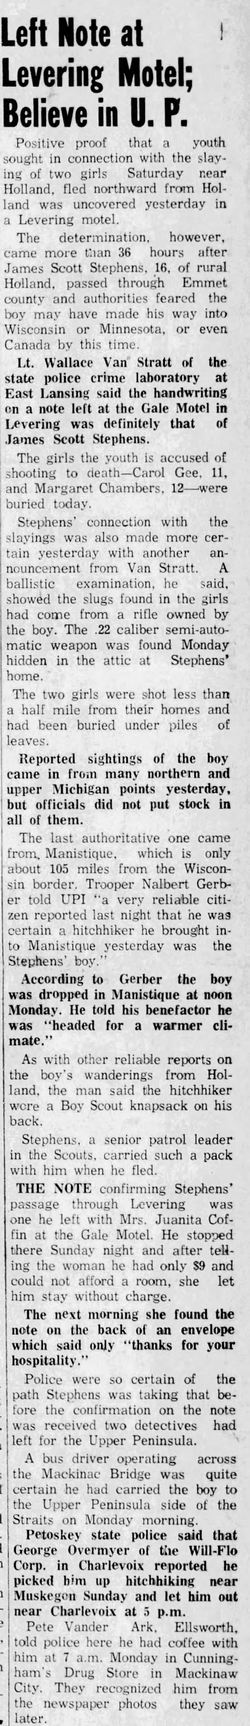 Levering Motel (Gales Motel) - 1961 Article On Slaying